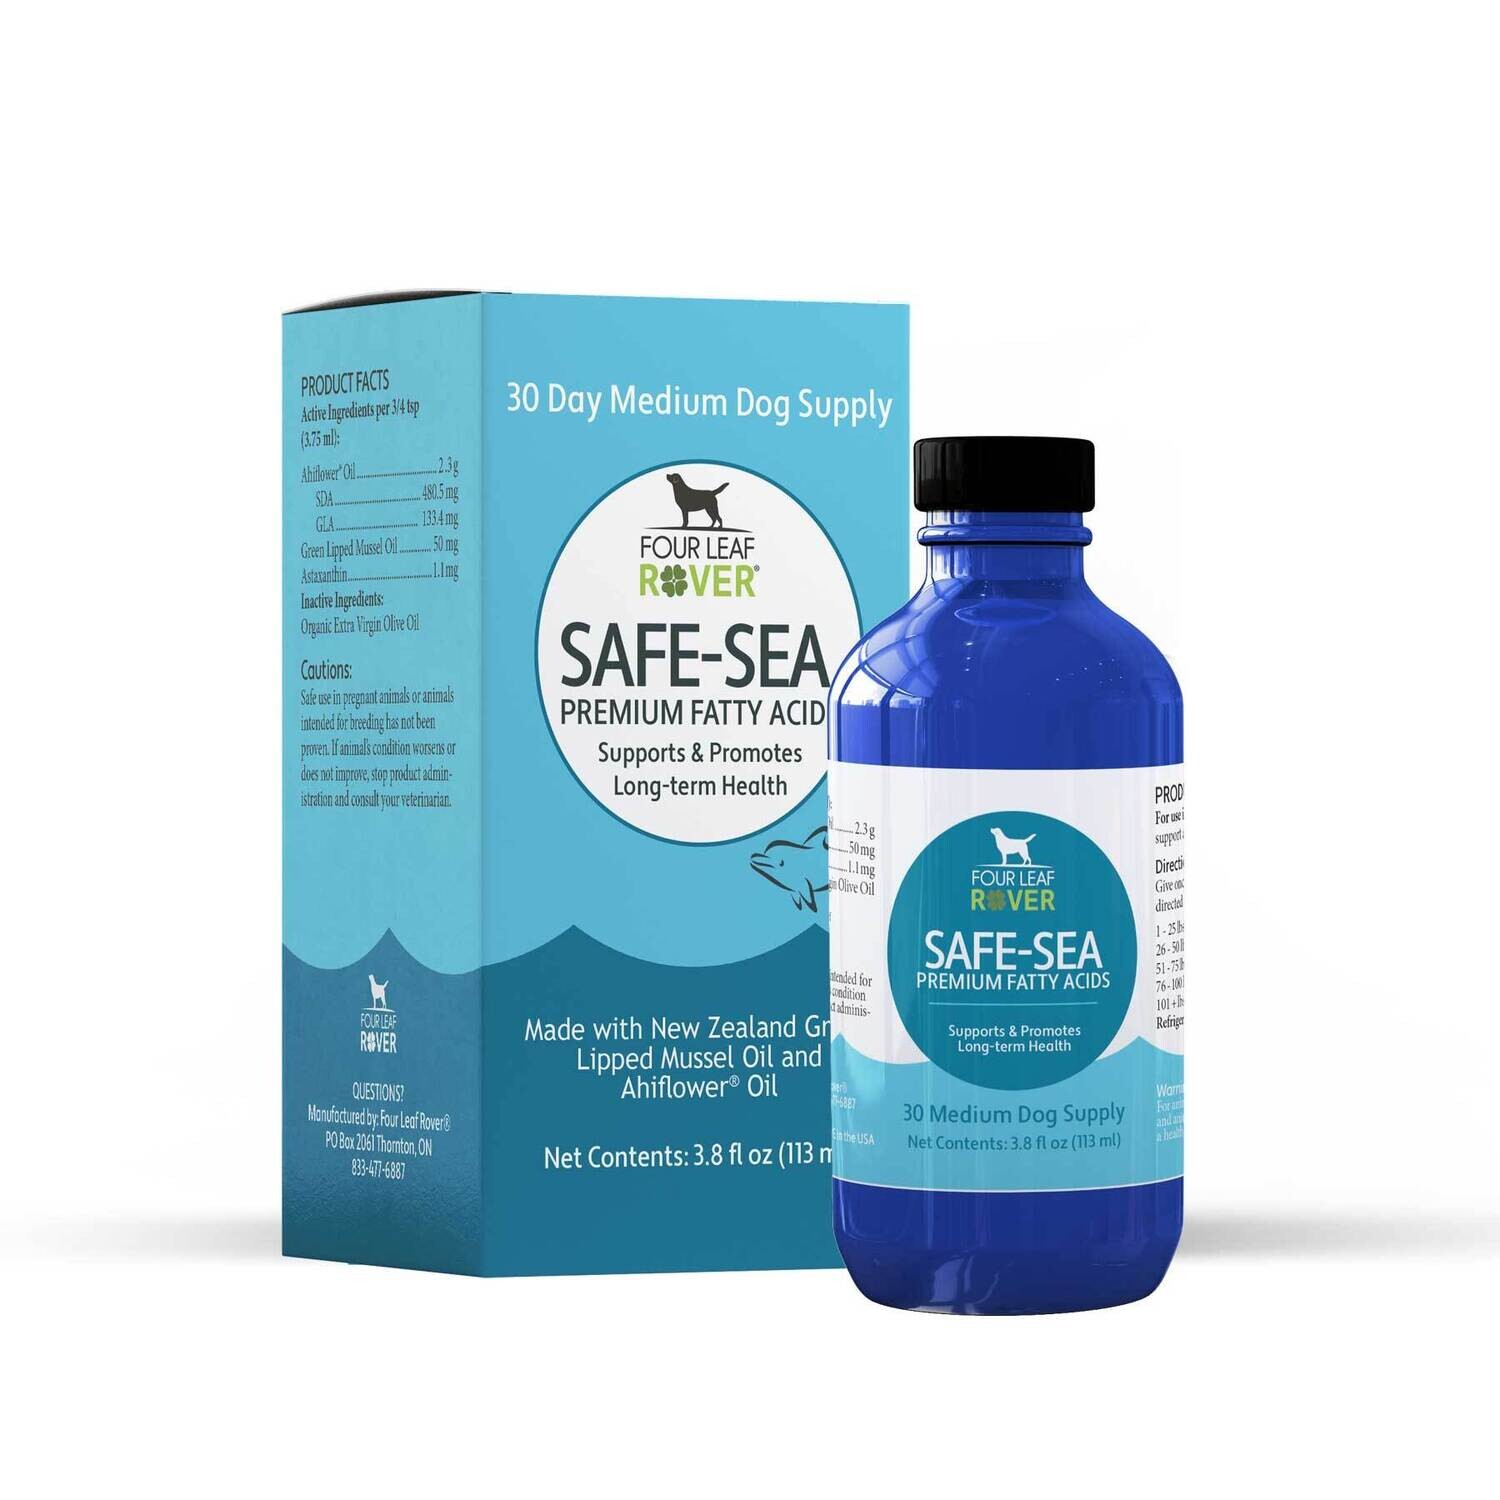 SAFE-SEA: GREEN LIPPED MUSSEL OIL FOR DOGS
Move over fish oil! Safe-Sea is a sustainable and healthy combination of New Zealand Green Lipped Mussel Oil and Ahiflower.